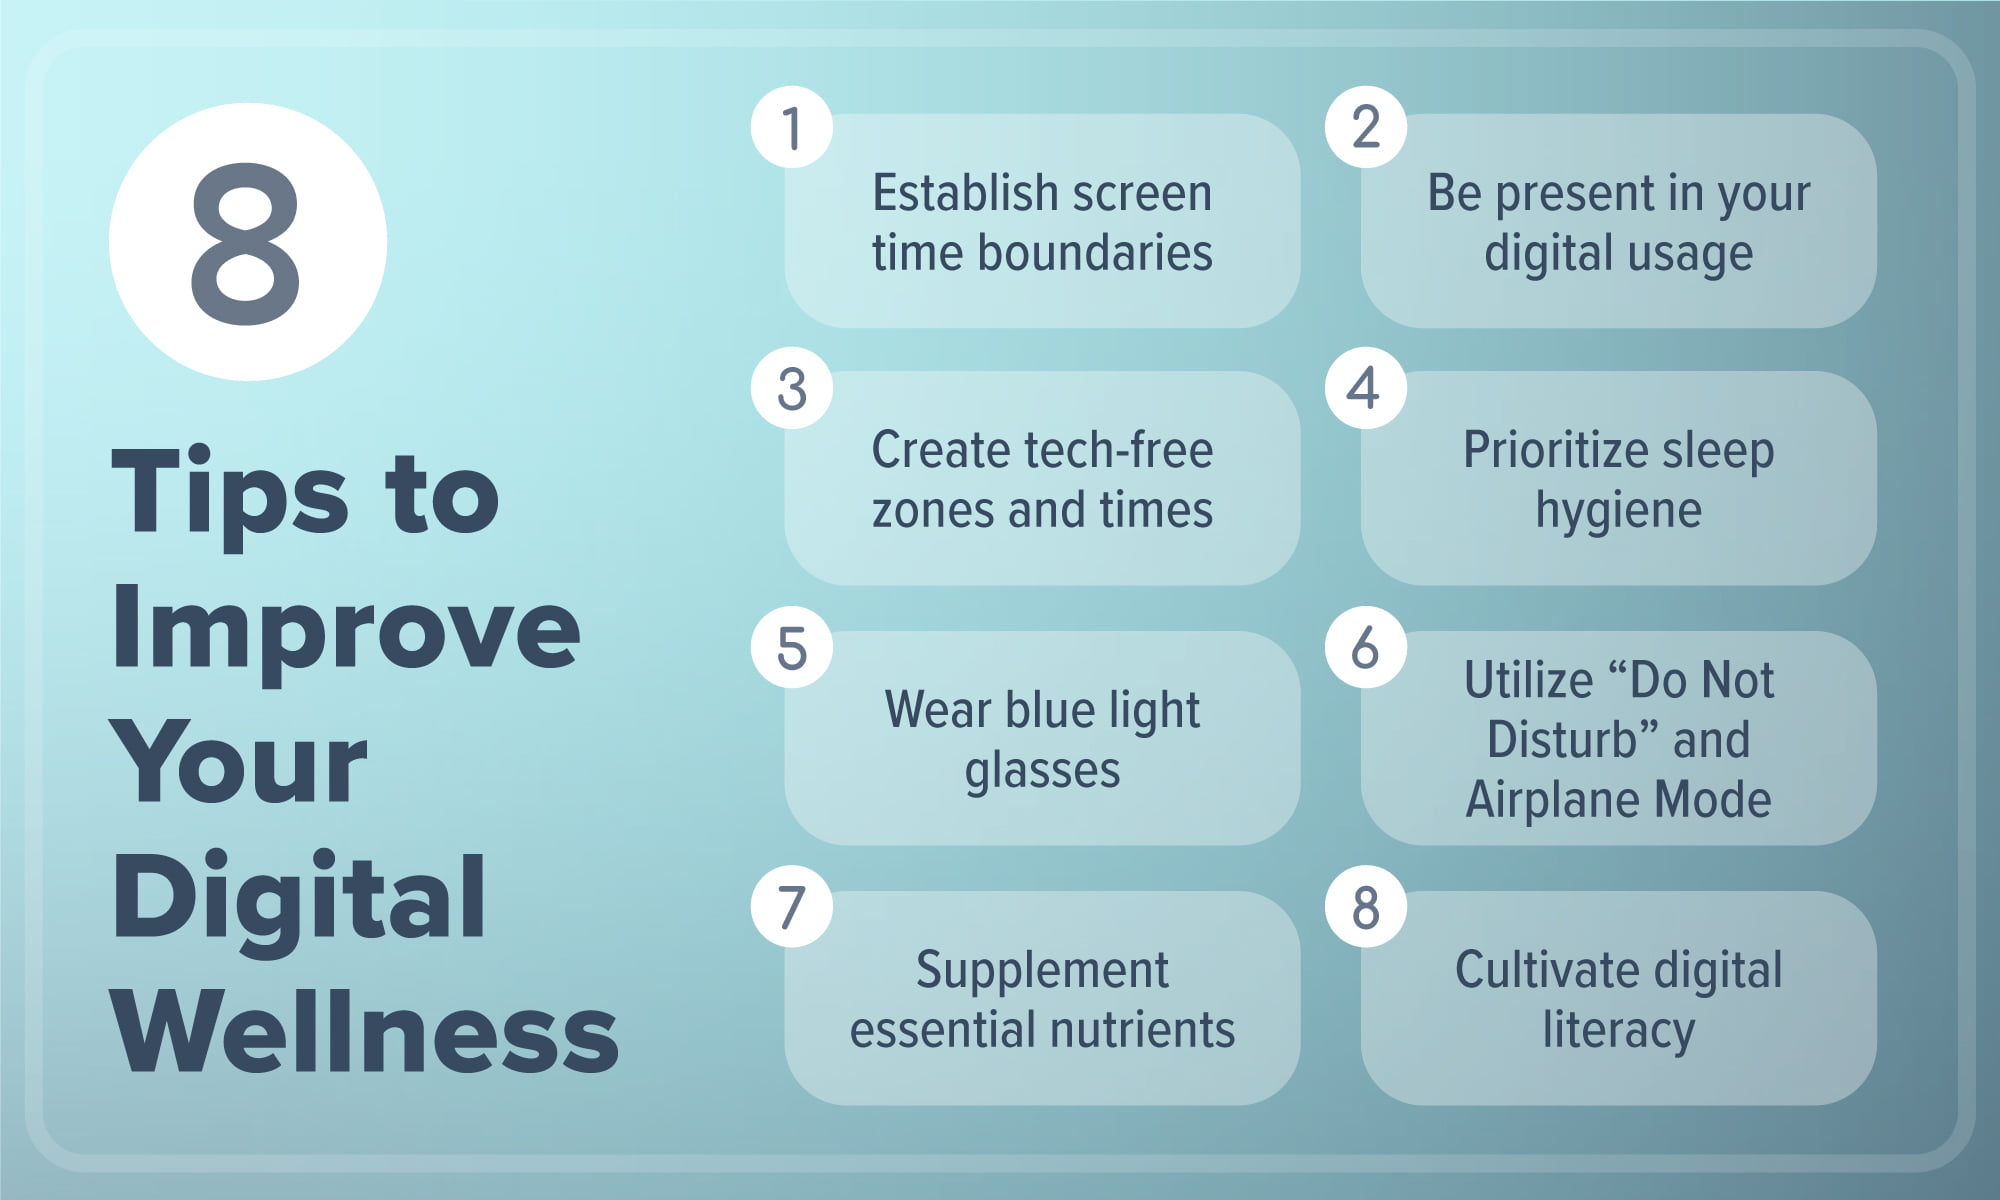 An infographic highlighting "8 Tips to Improve Your Digital Wellness," including establishing screen time boundaries, being present in your digital usage, creating tech-free zones and times, prioritizing sleep hygiene, wearing blue light glasses, utilizing "do not disturb" and airplane mode, supplementing essential nutrients, and cultivating digital literacy.